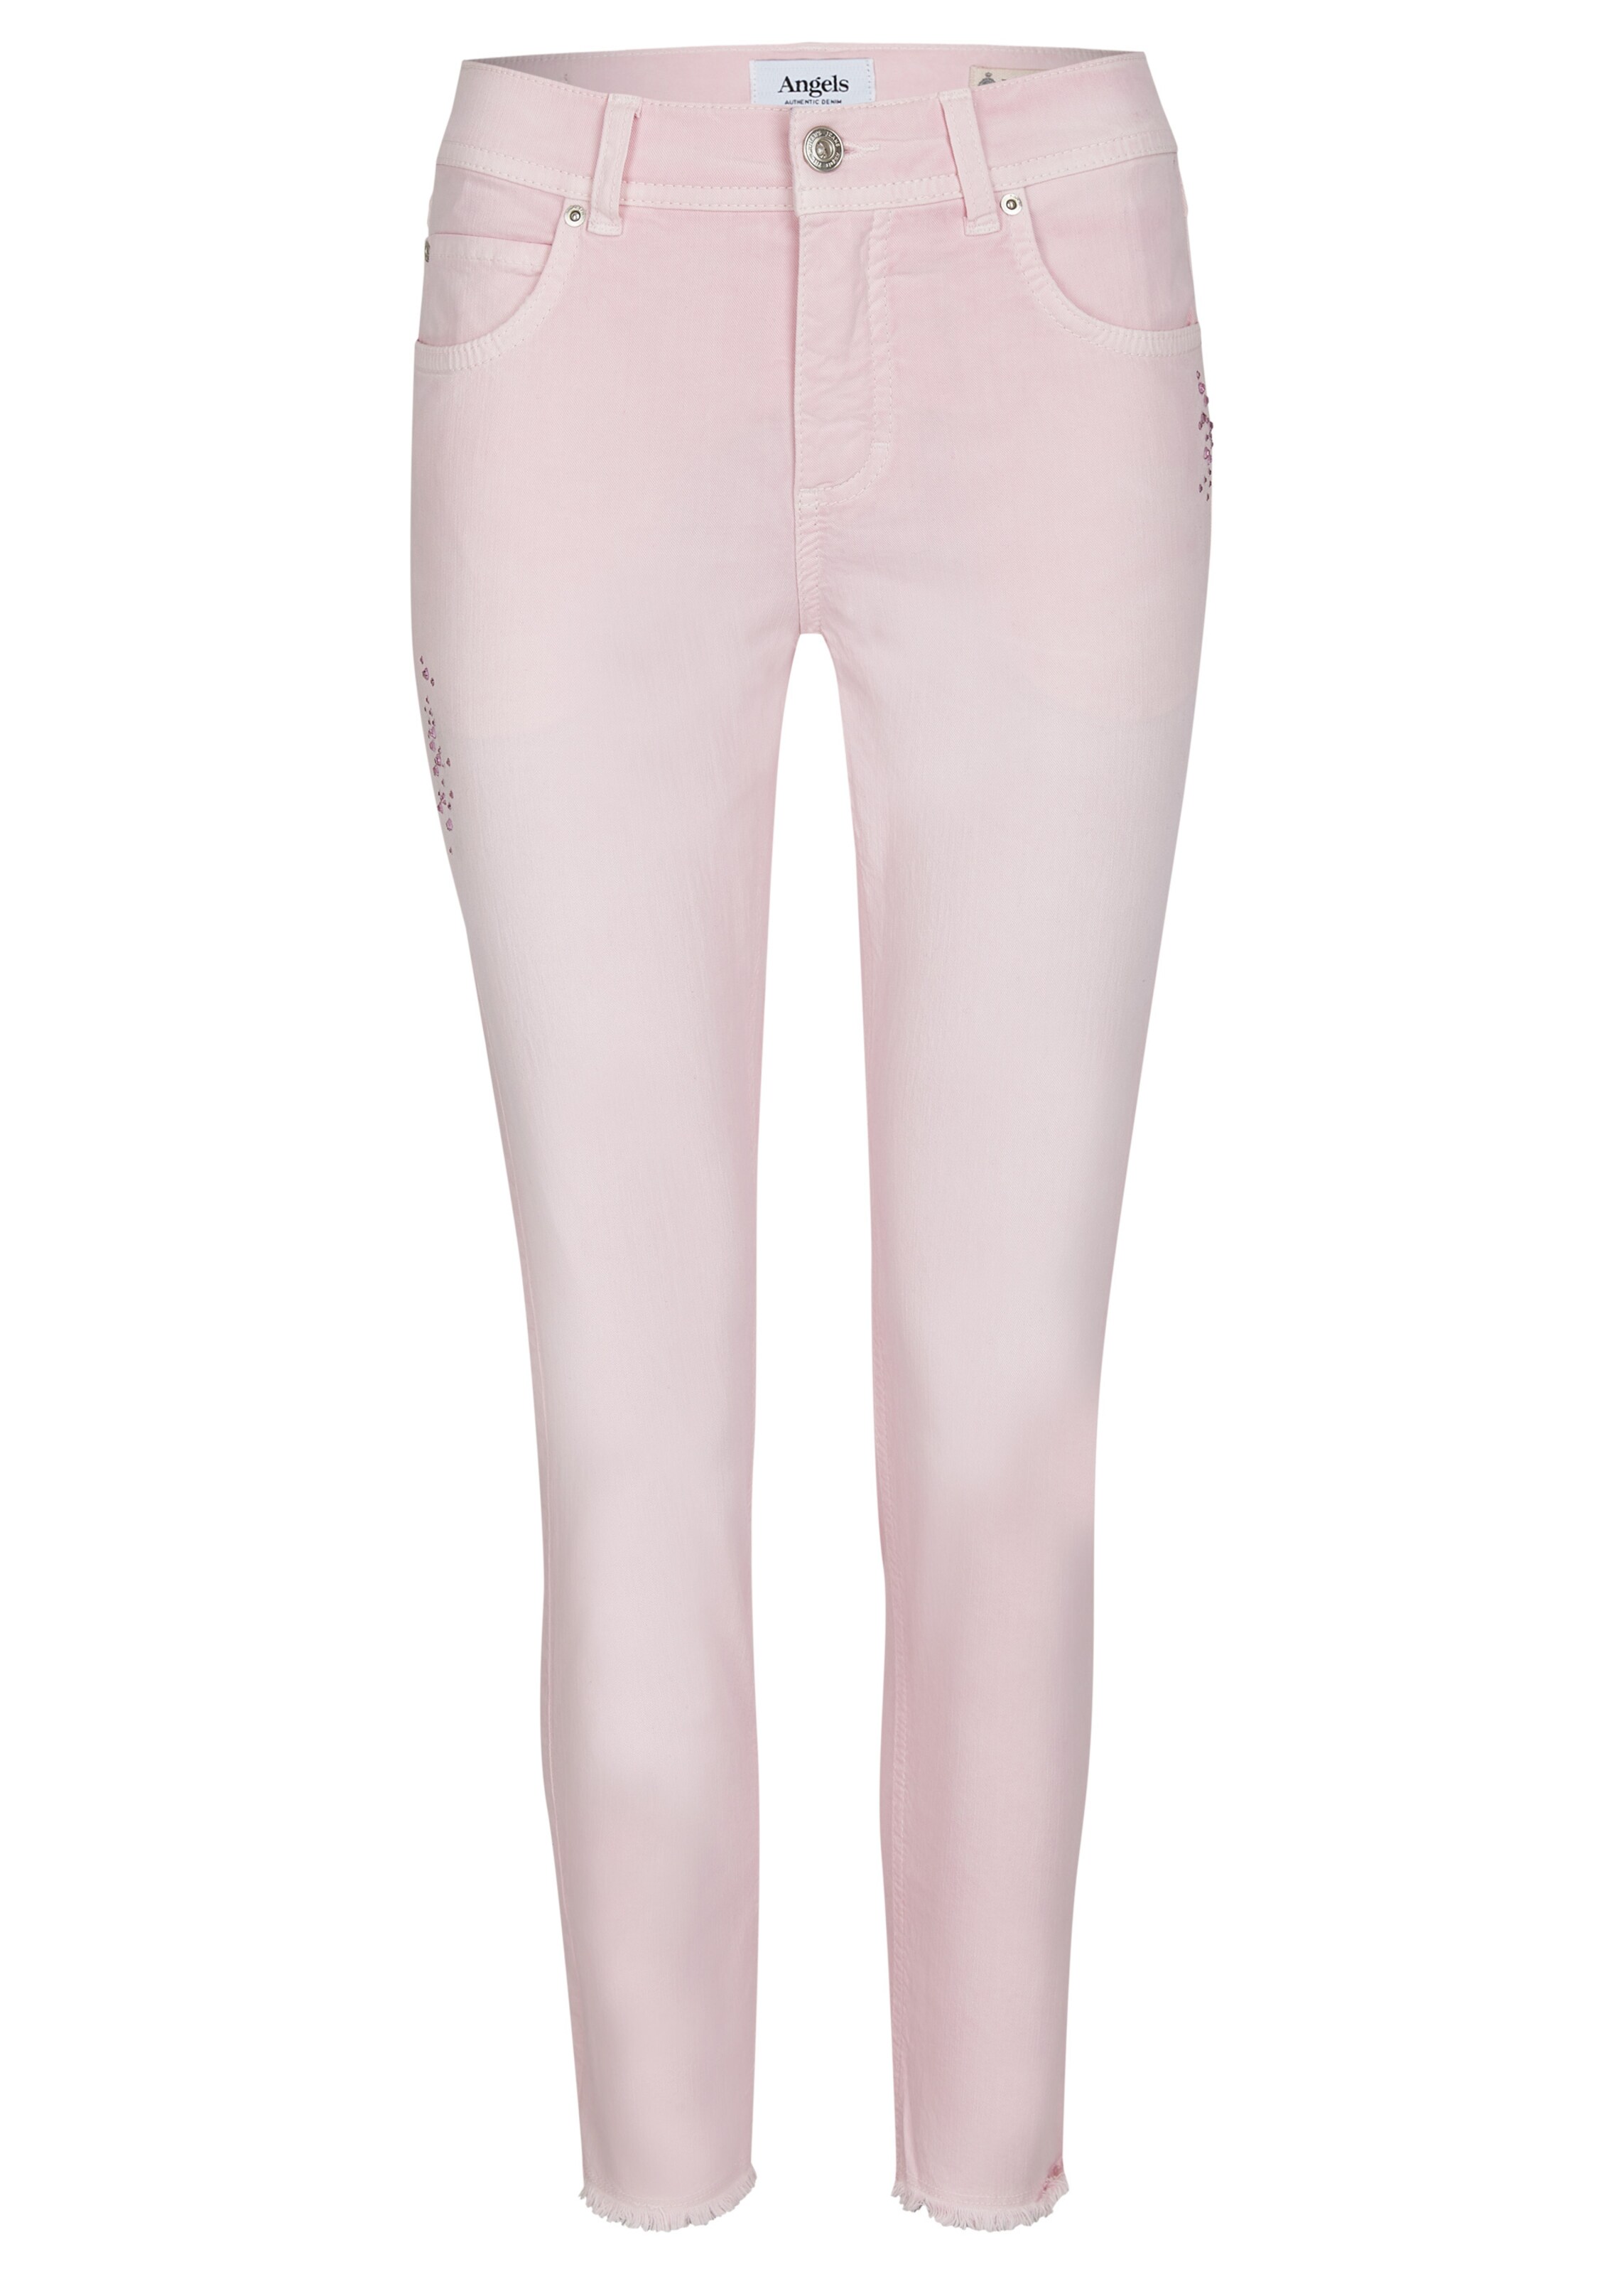 Frauen Jeans Angels Jeans 'Ornella Glamour' in Rosa - GY59469